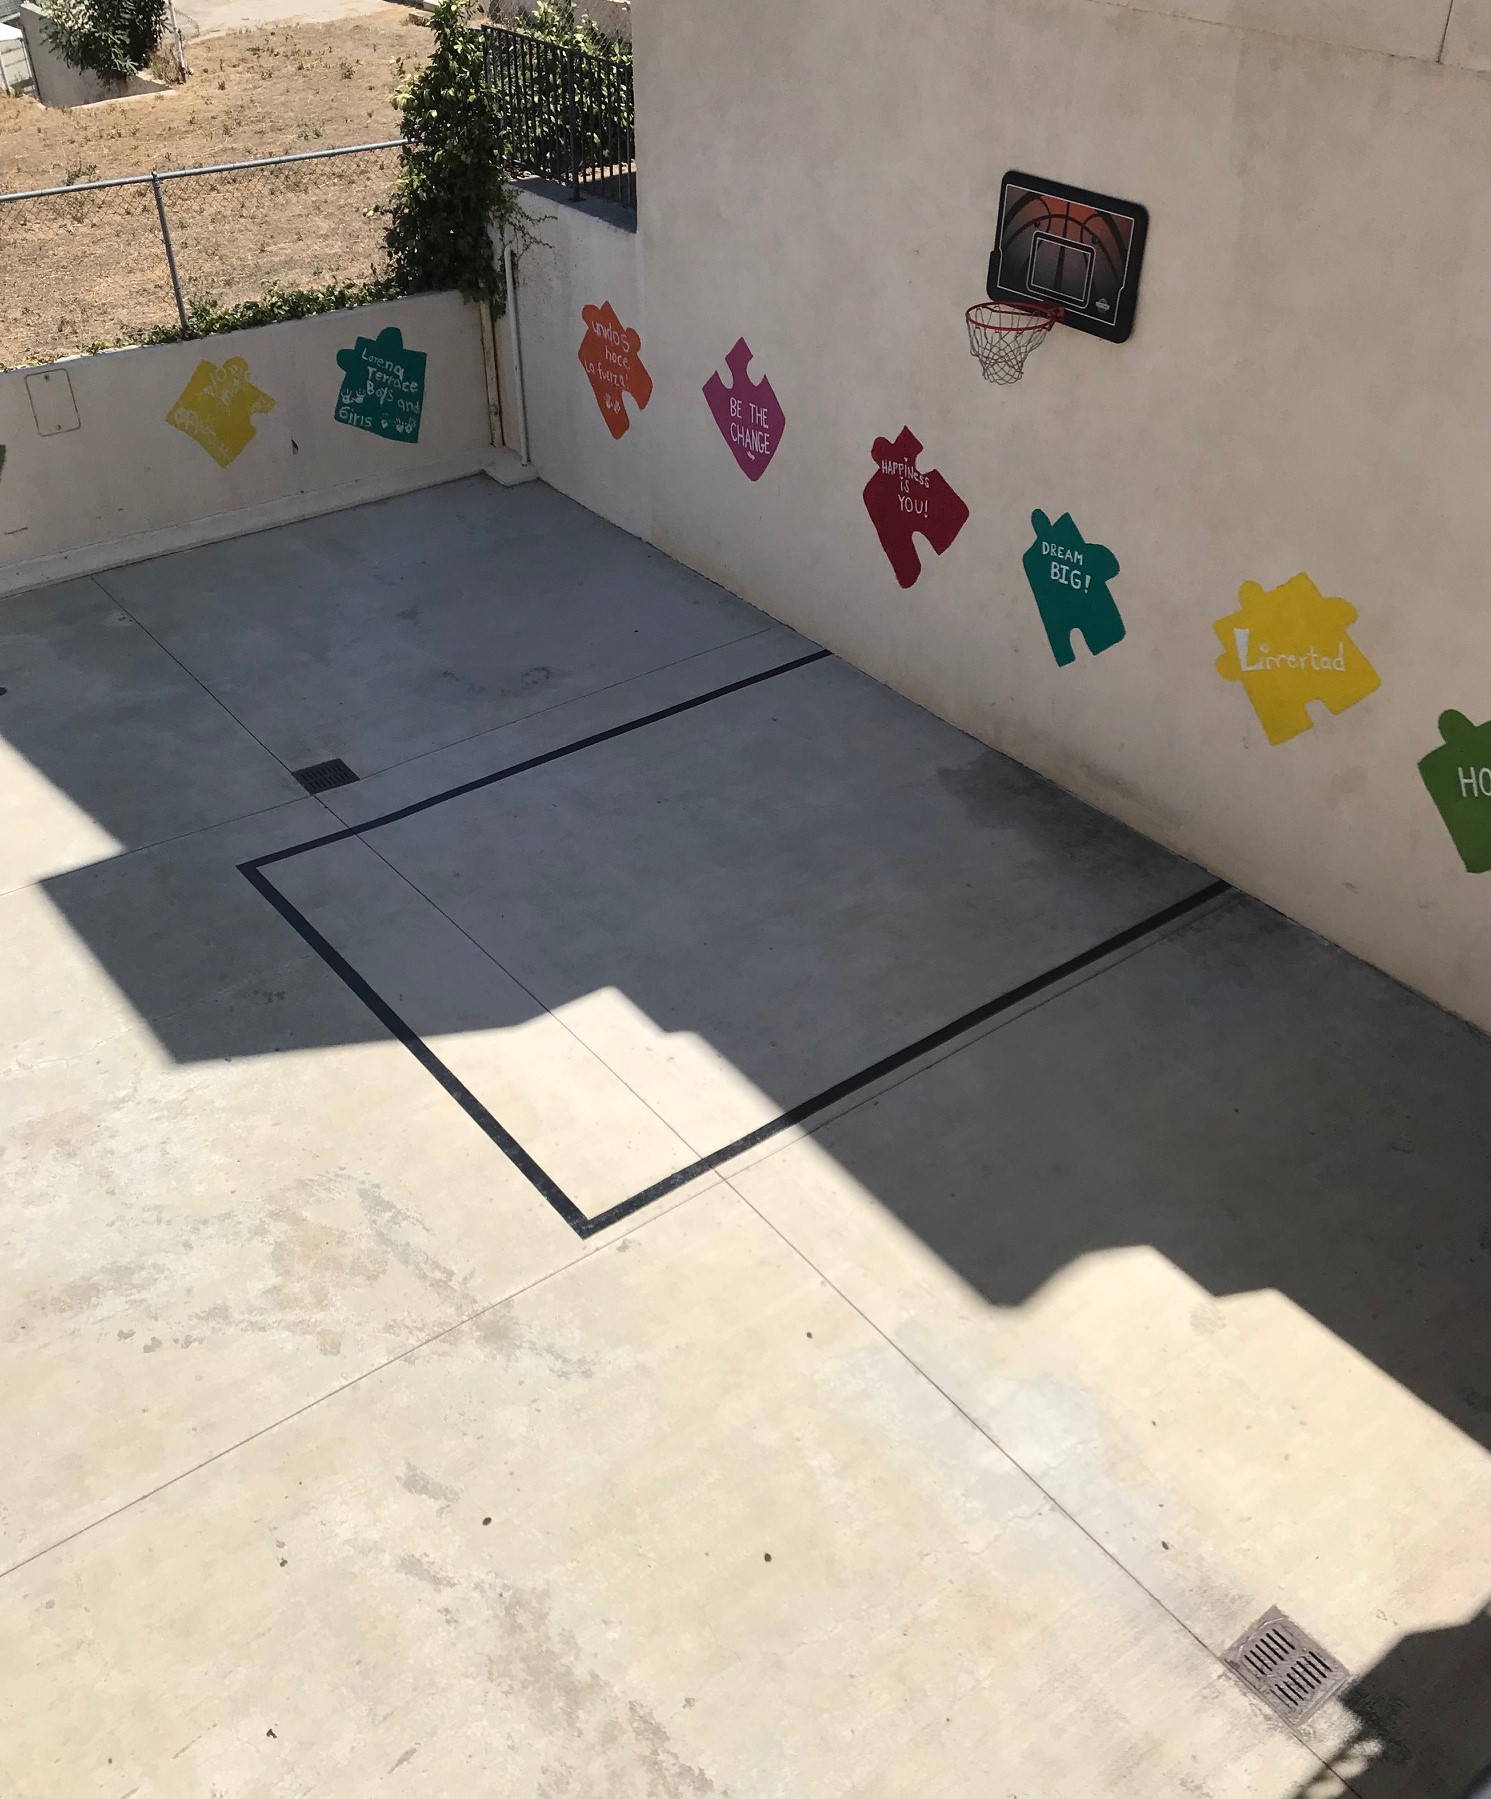 Exterior view of a basetball court at Lorena Terrace with large colorful puzzle piecies painted on the walls